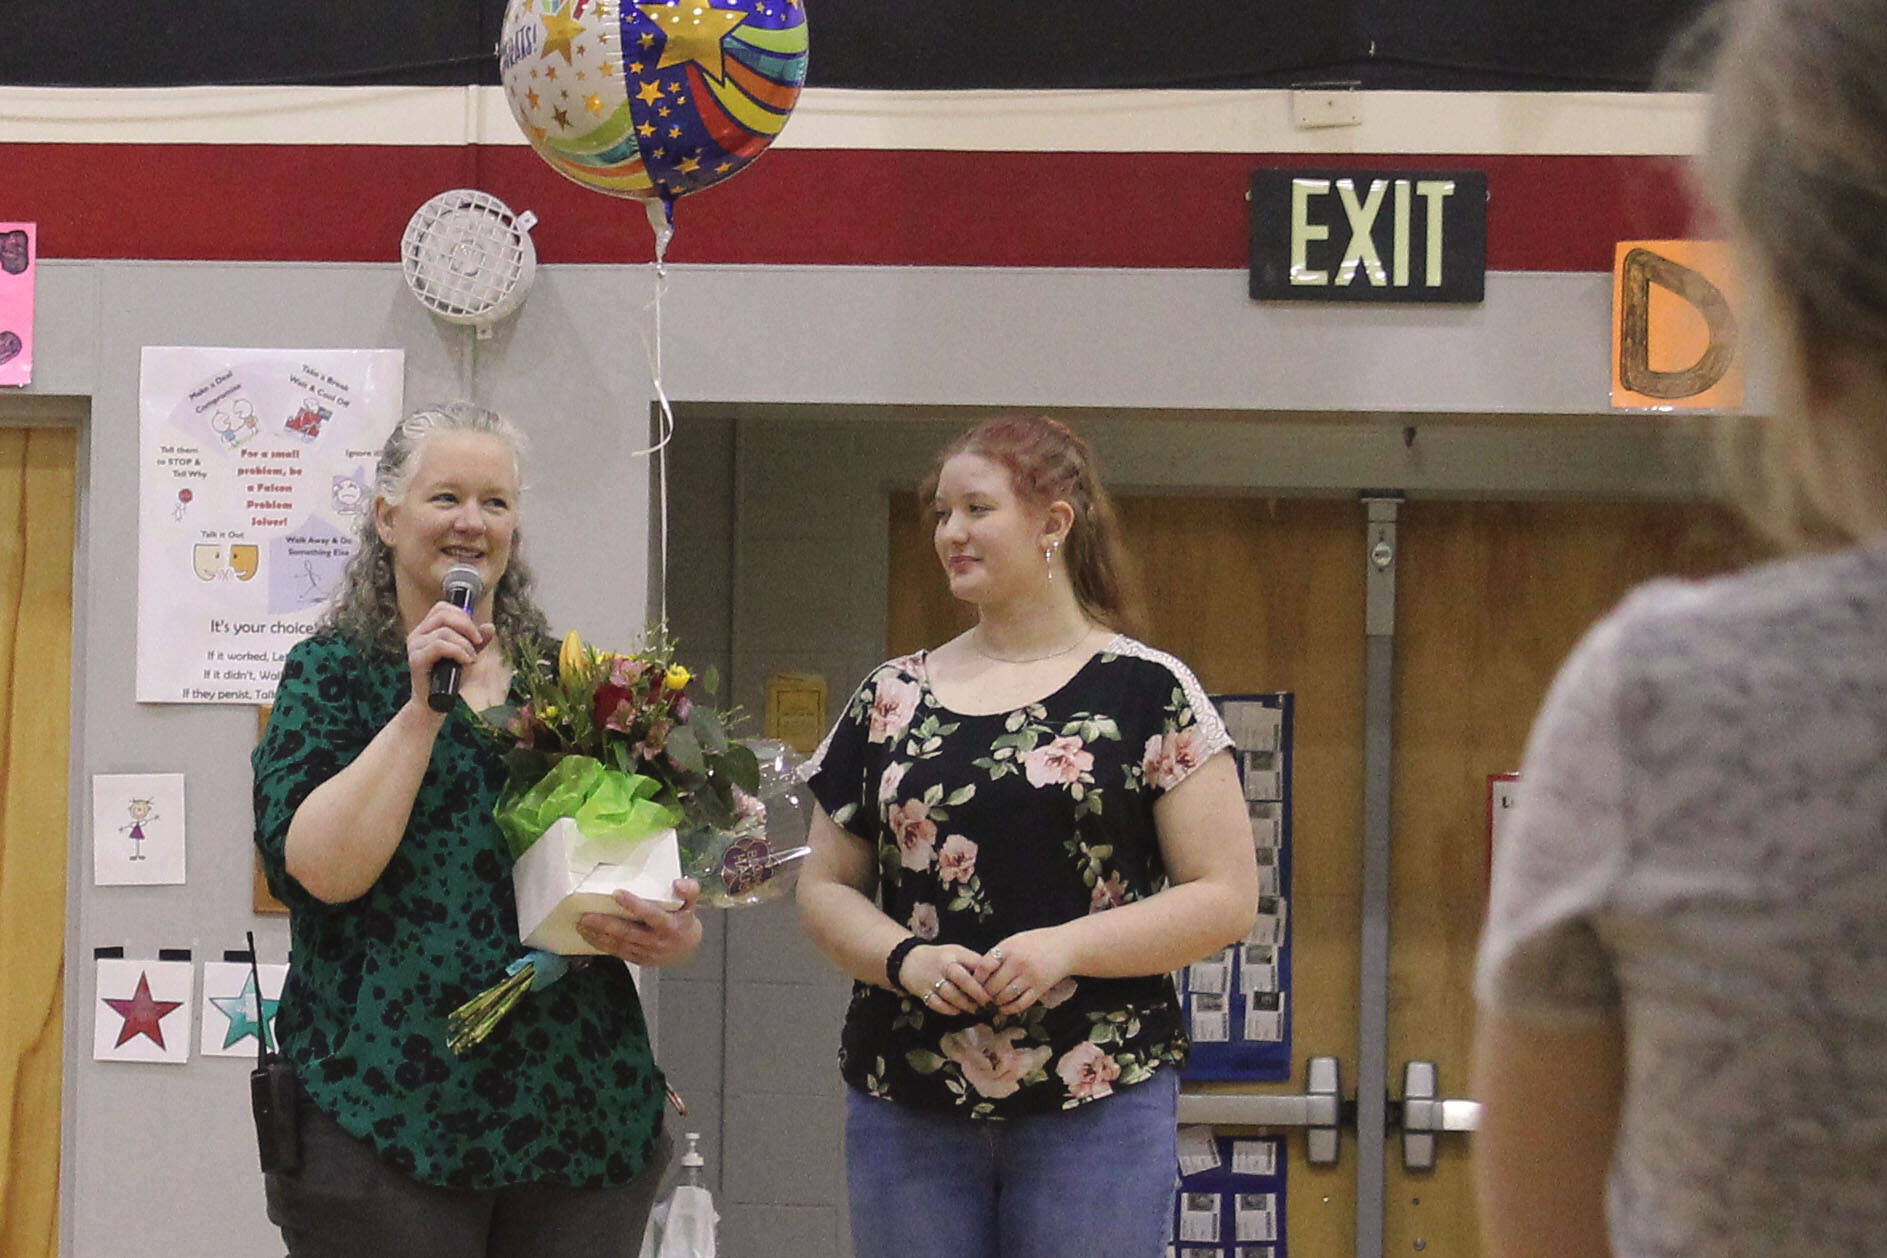 Sterling Elementary School Principal Denise Kelly speaks at a surprise assembly held at the school to celebrate her being named Alaska Elementary Principal of the Year on Monday, May 2, 2022, in Sterling, Alaska. On the right, Kelly’s daughter, Freya, attends. (Ashlyn O’Hara/Peninsula Clarion)